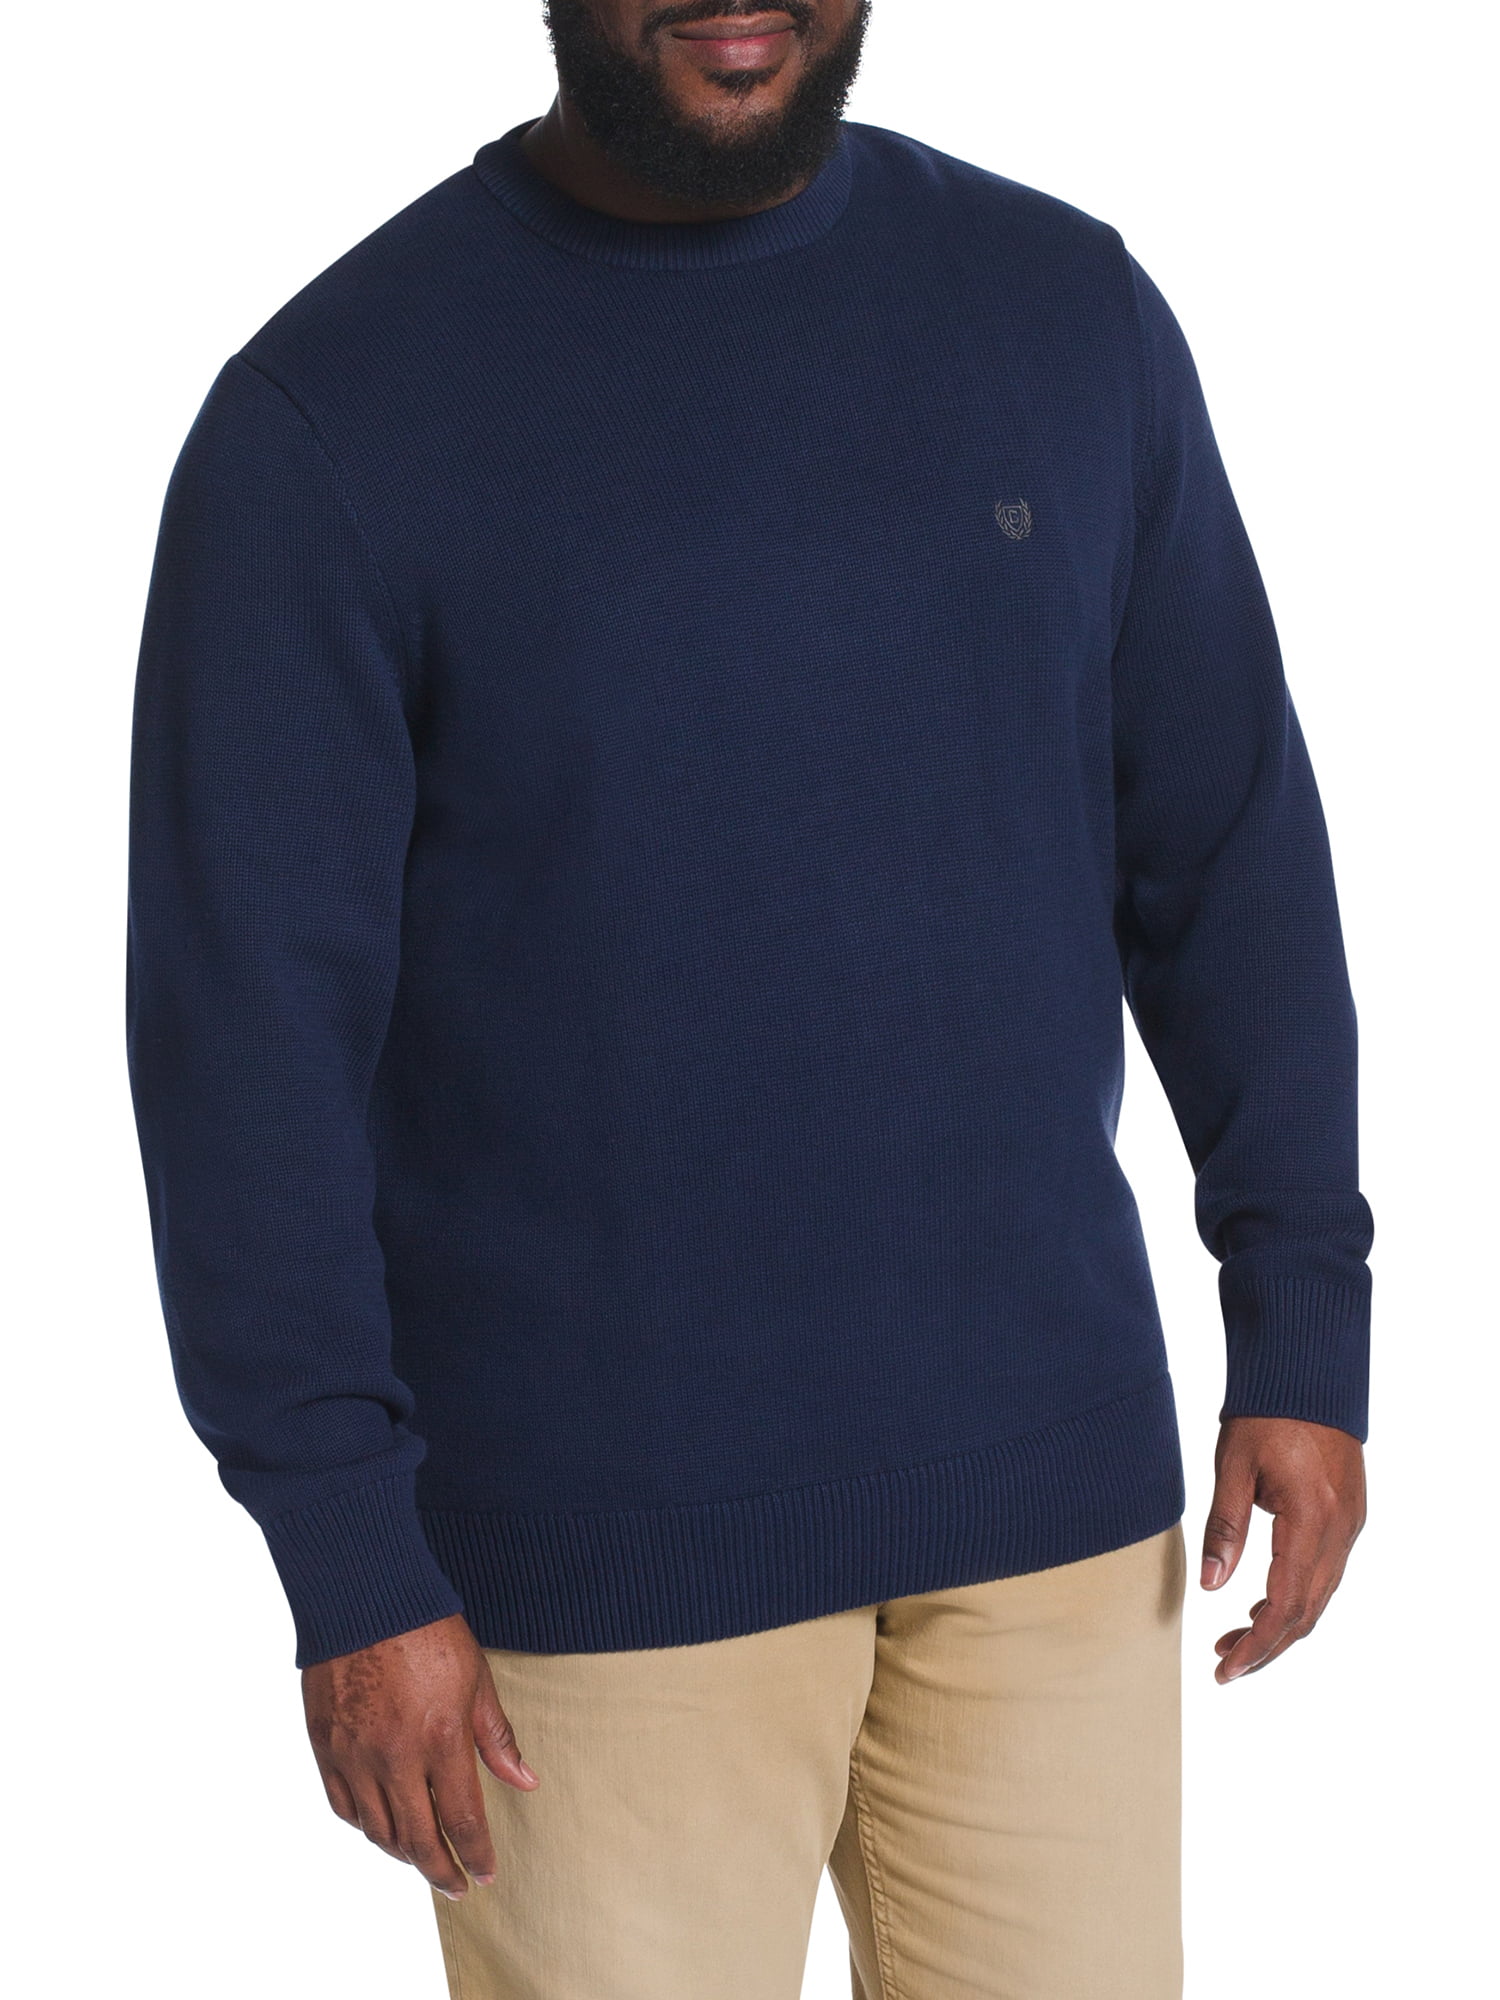 Chaps Mens Big and Tall Classic Fit Cotton Crewneck Sweater